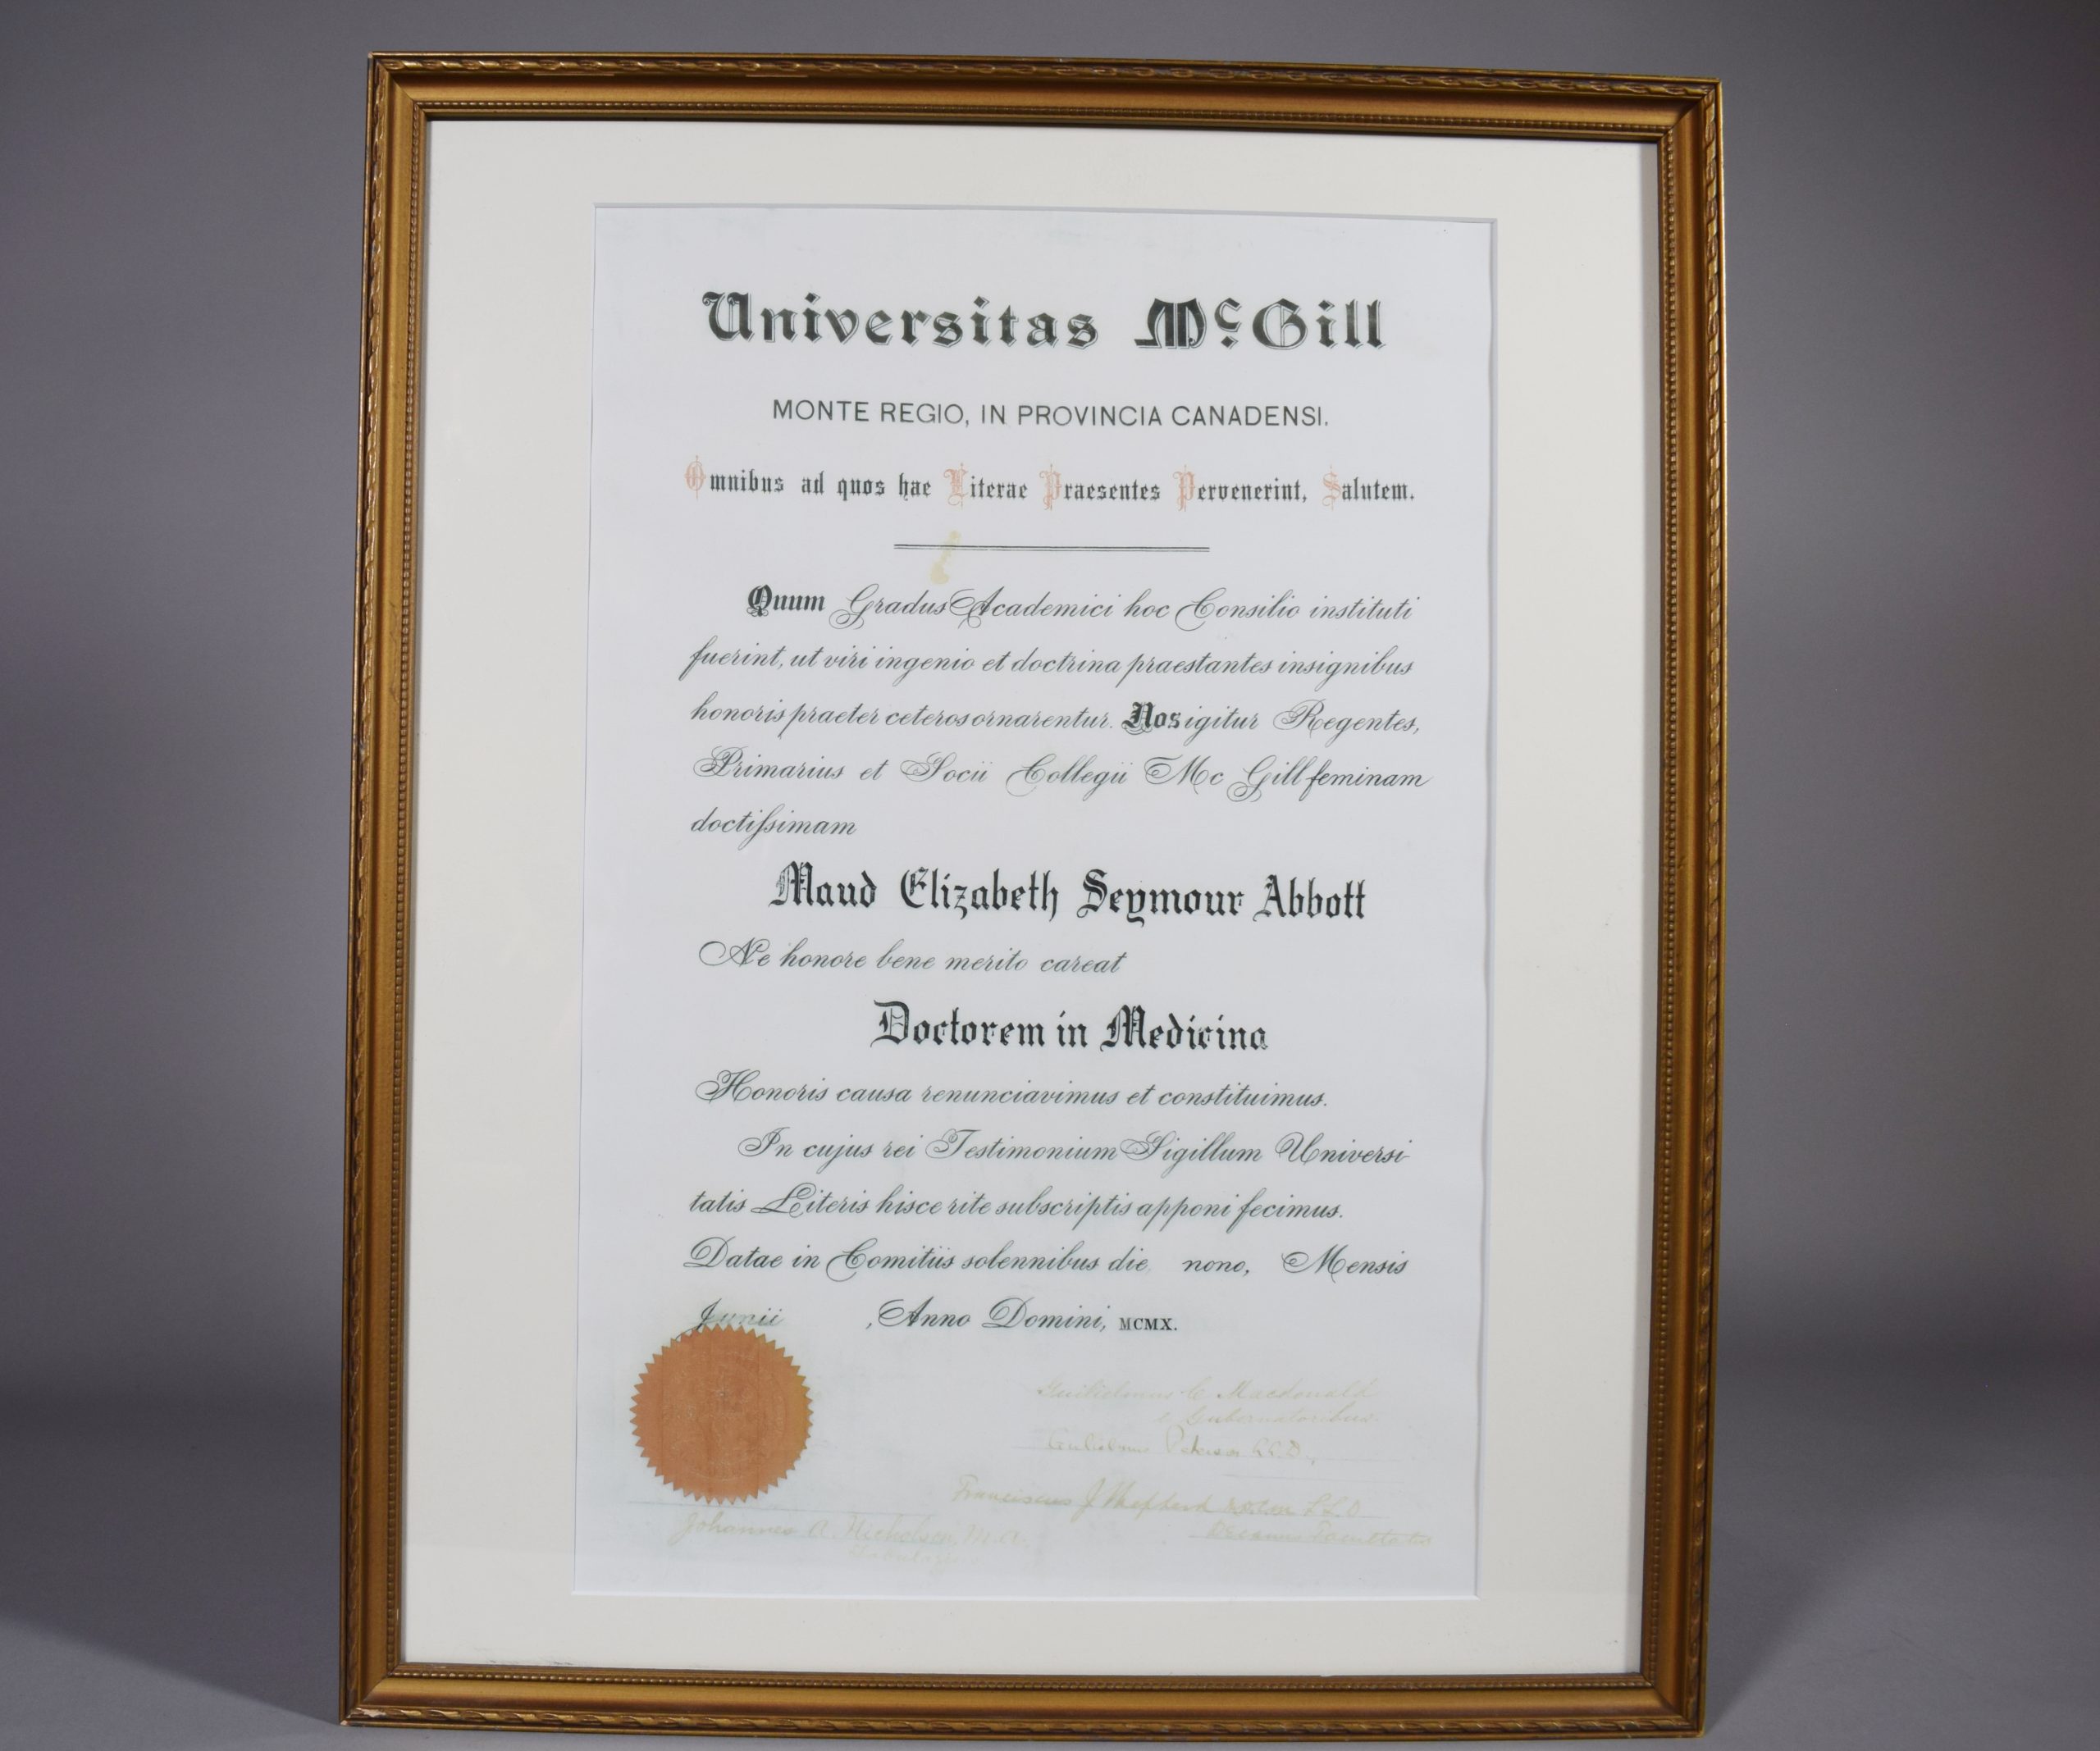 McGill University diploma. “Doctorem in Medicina” awarded to Maud Elizabeth Seymour Abbott by McGill University. The text on the diploma is in Latin. The lower left corner bears the red seal of McGill University, with several signatures to its right. The diploma is displayed in a narrow, simply decorated gold frame with a white mat.